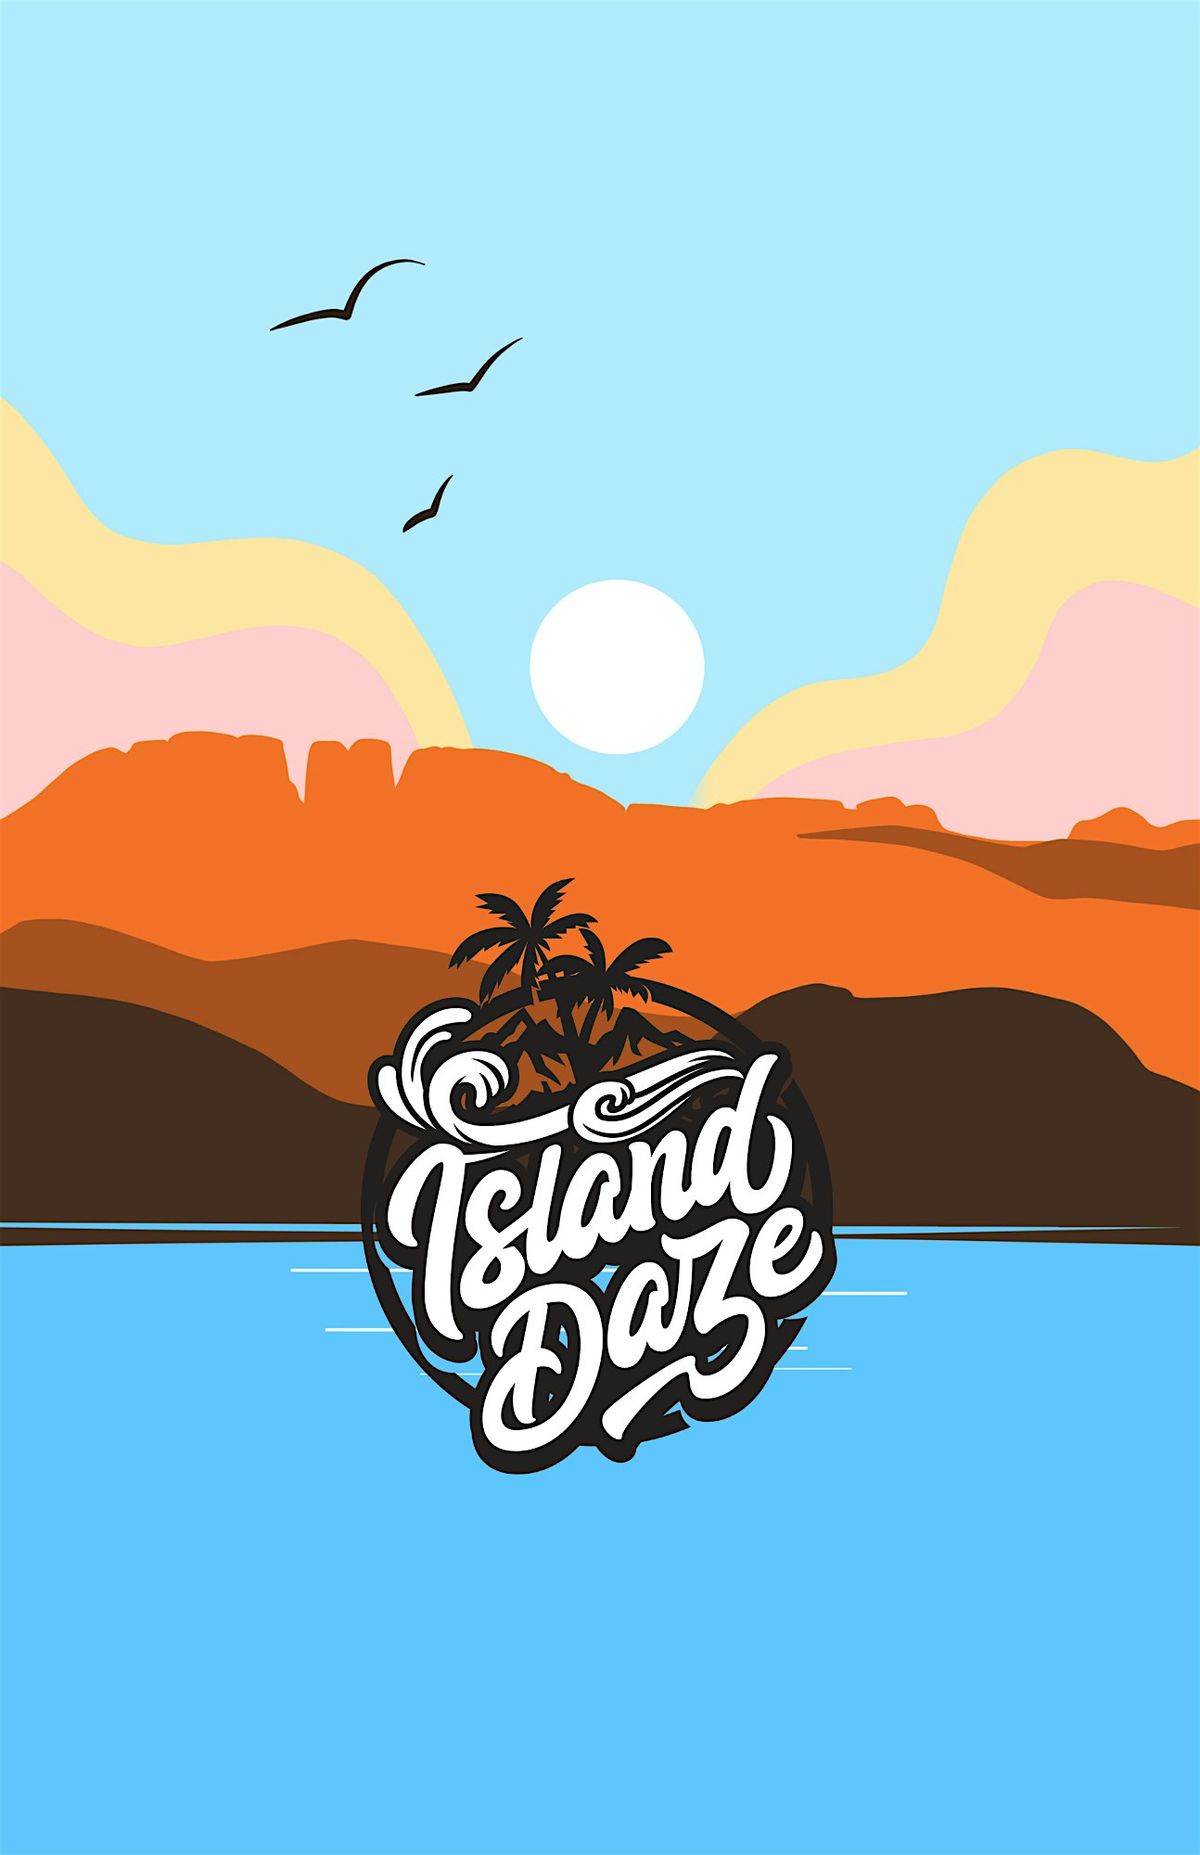 Island Daze - Purpose Brewing - Fort Collins - 12pm-9pm RSVP for free 6oz